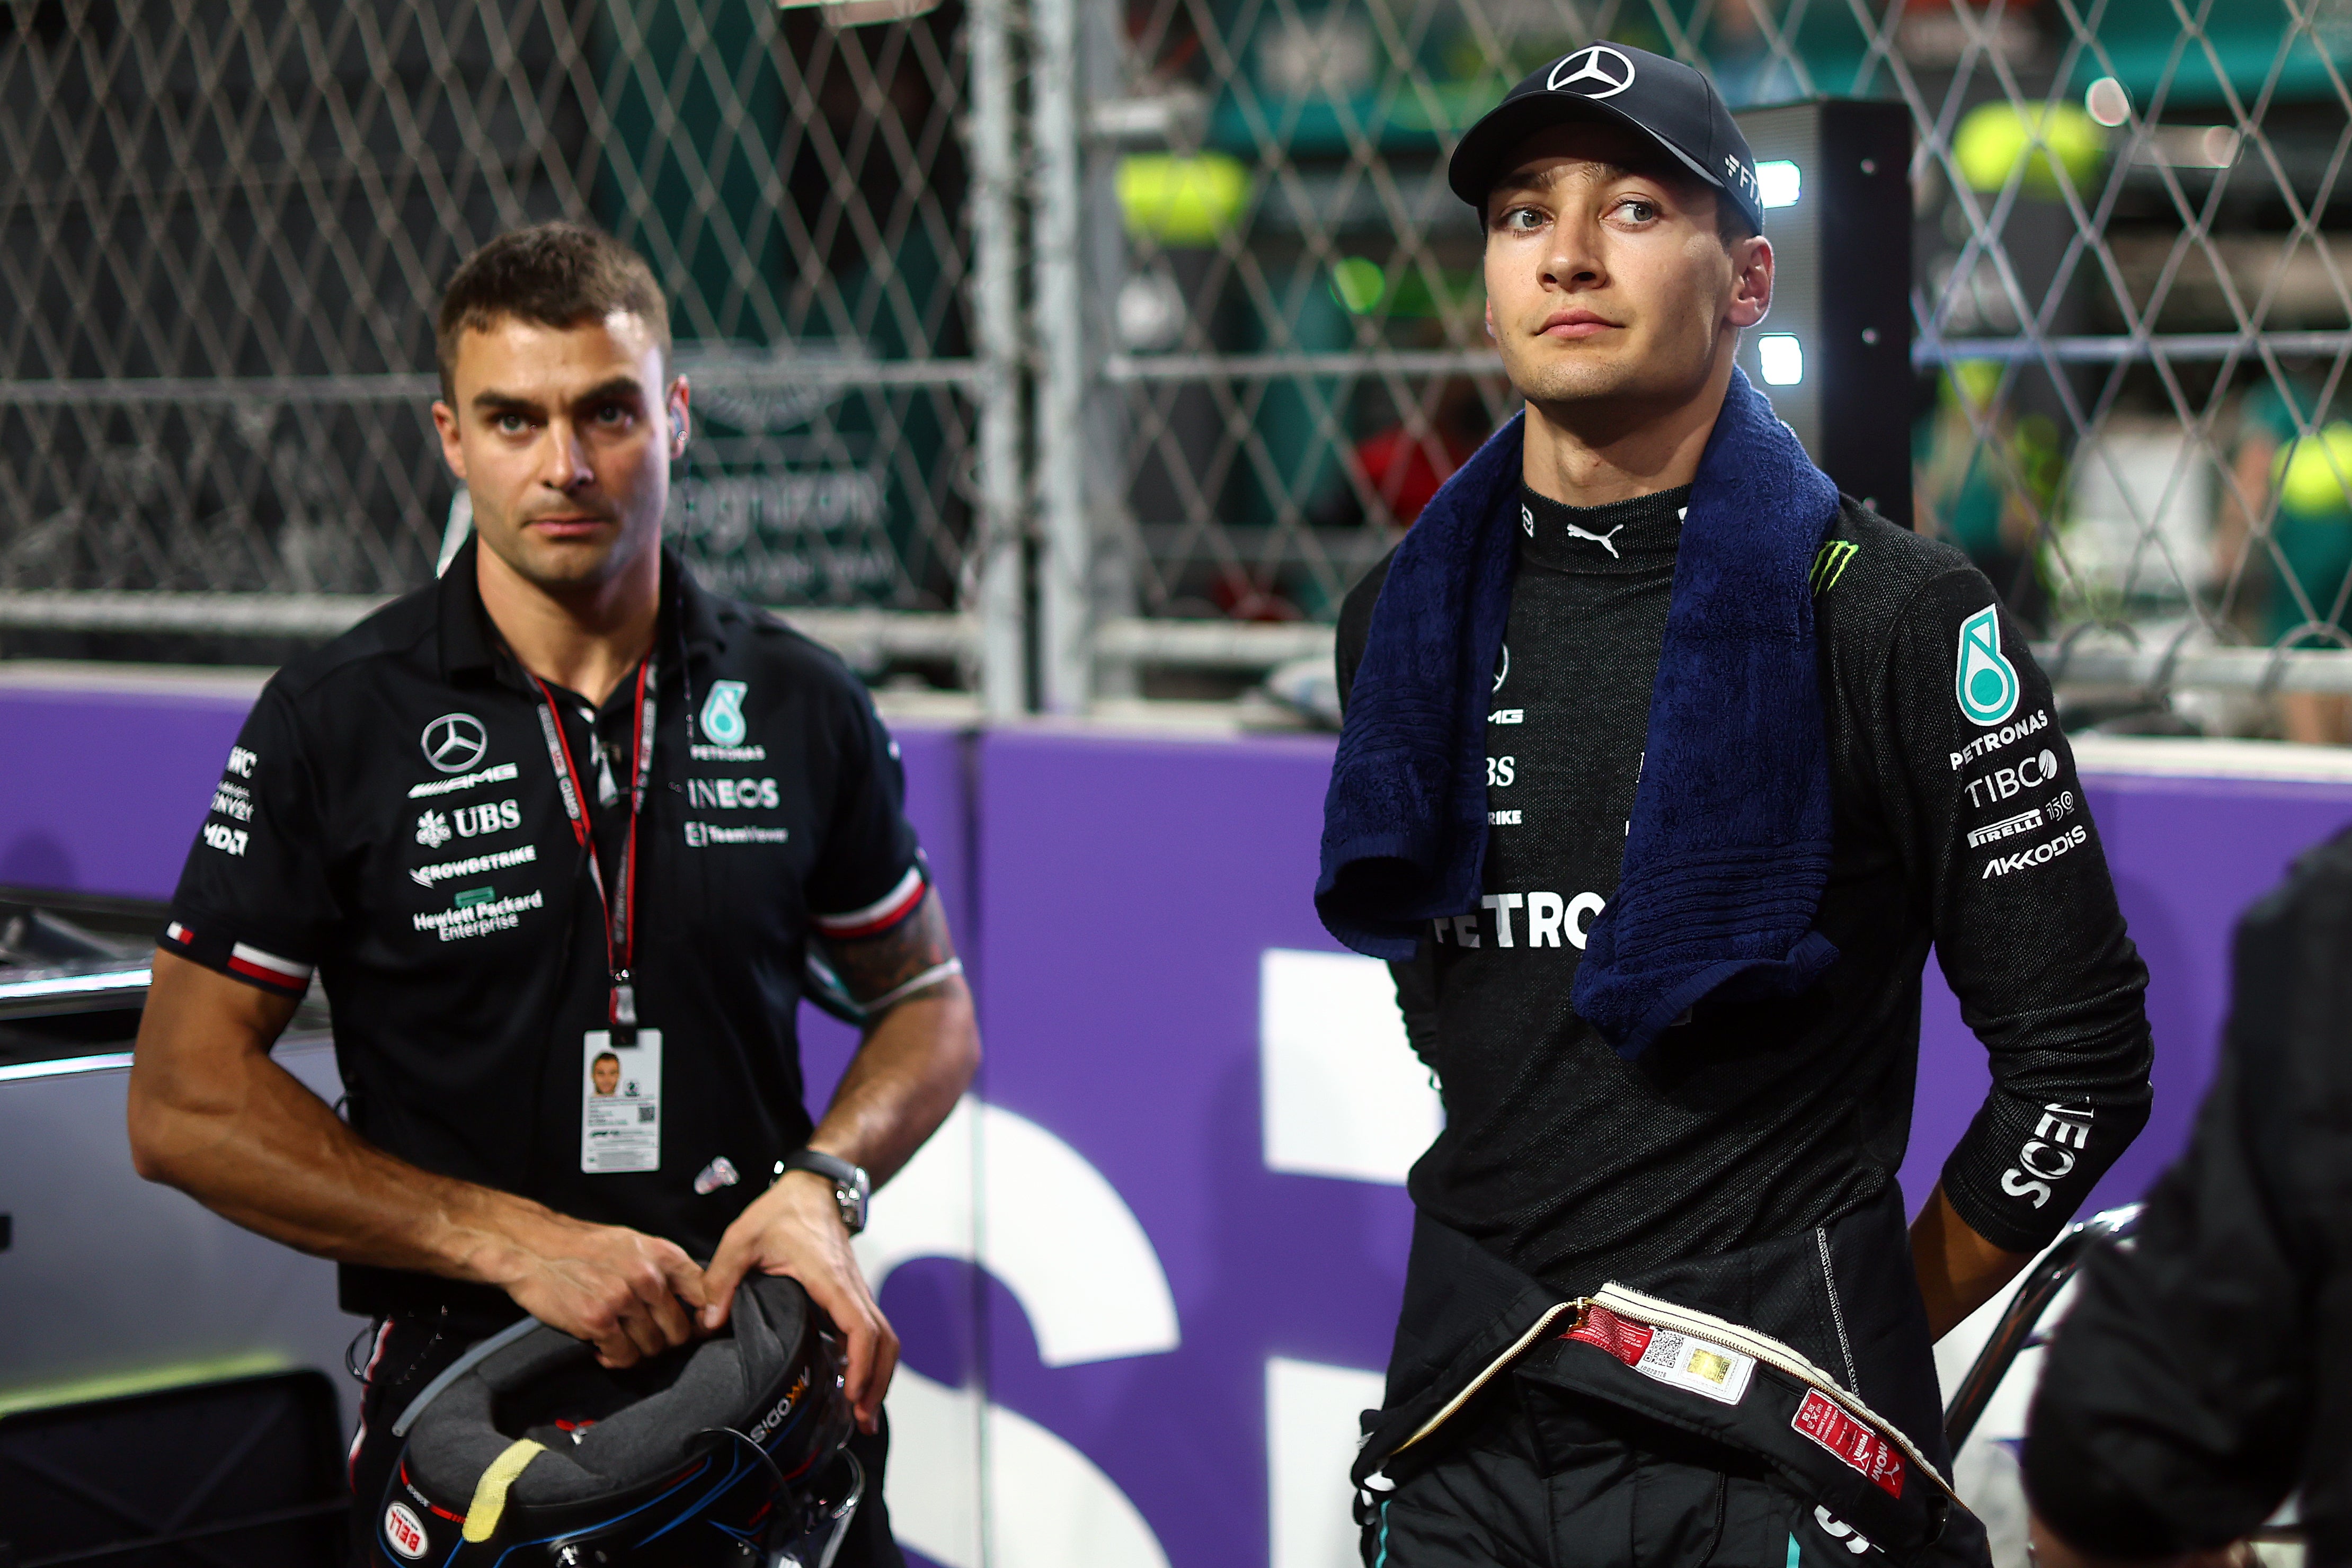 George Russell believes that Mercedes must make quicker progress to challenge in the 2022 F1 season